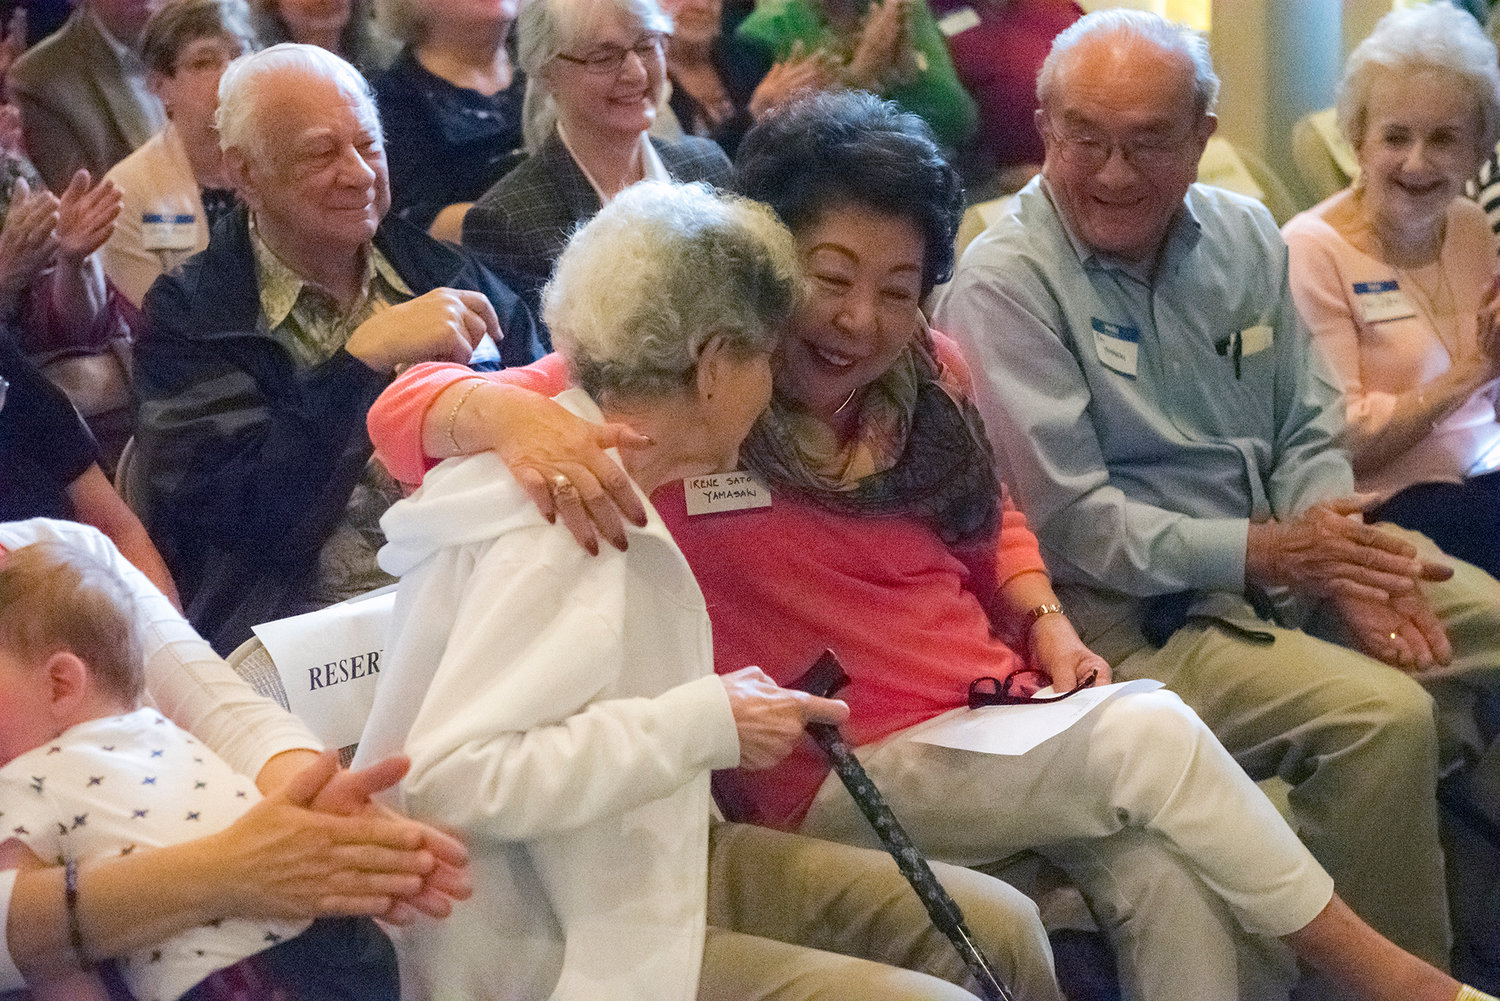 Irene (Sato) Yamasaki, center, who grew up in Adna and was 18 months old when the train left Chehalis for Tule Lake, hugs long time friend Doris Hastings on Saturday during the dedication of the Japanese internment plaque at the Lewis County Historical Museum. Yamasaki served as a flower girl at Hastings’ wedding in the 1950s.